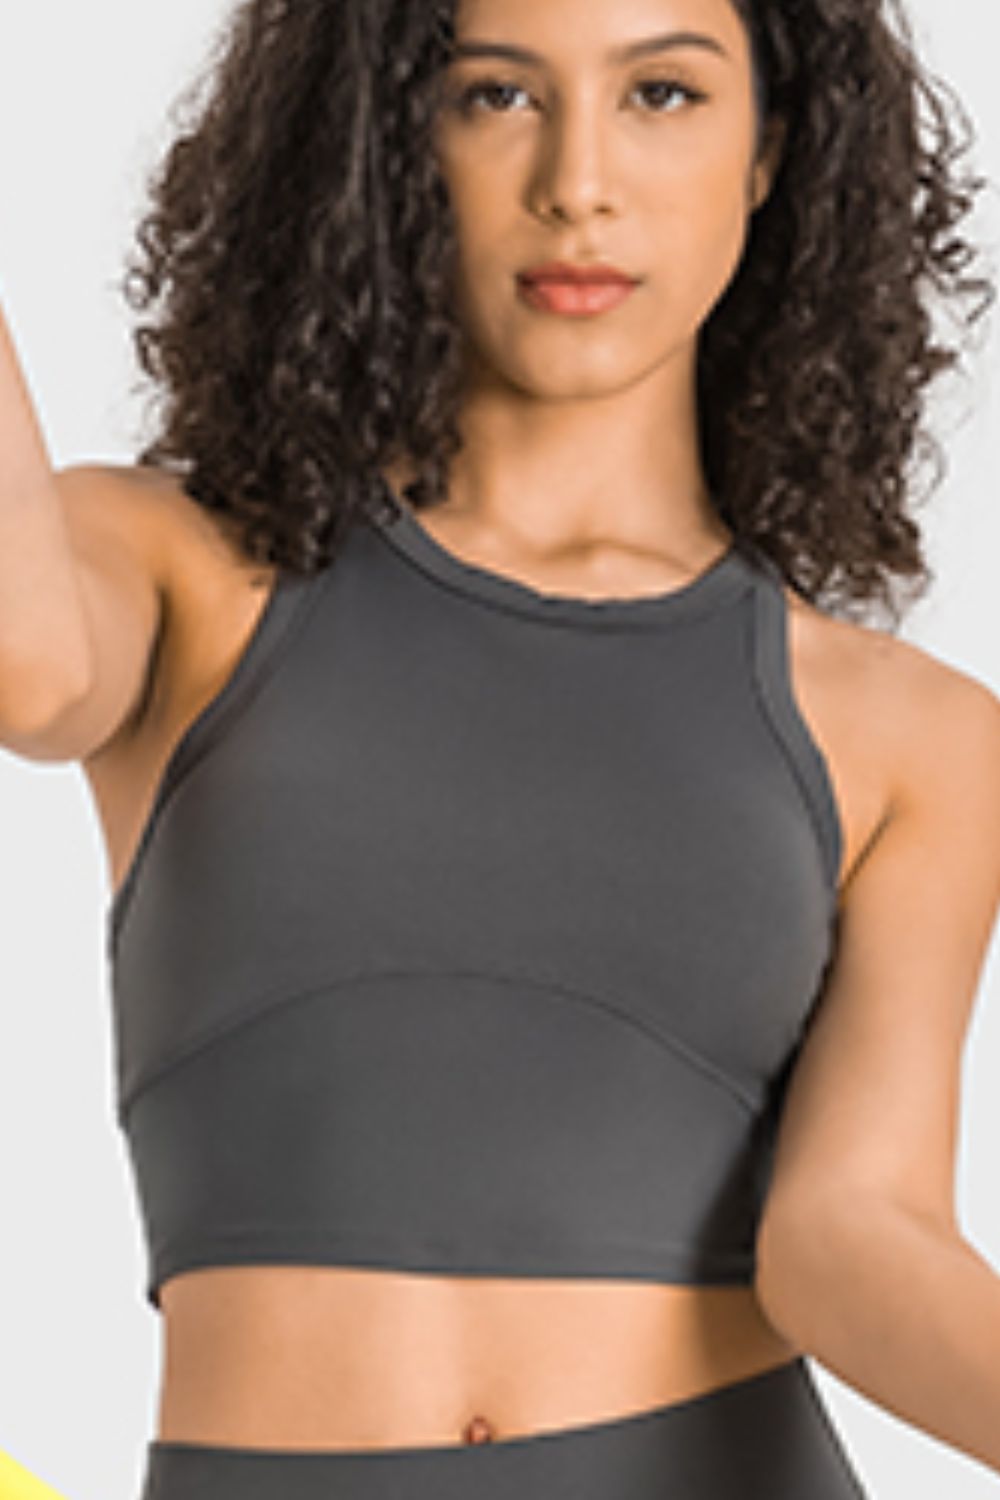 Ethereal Embrace - Embody the Soul of Freedom and Beauty with Our Racerback Cropped Sports Tank - Experience Seamless Flow in Every Movement - Guy Christopher